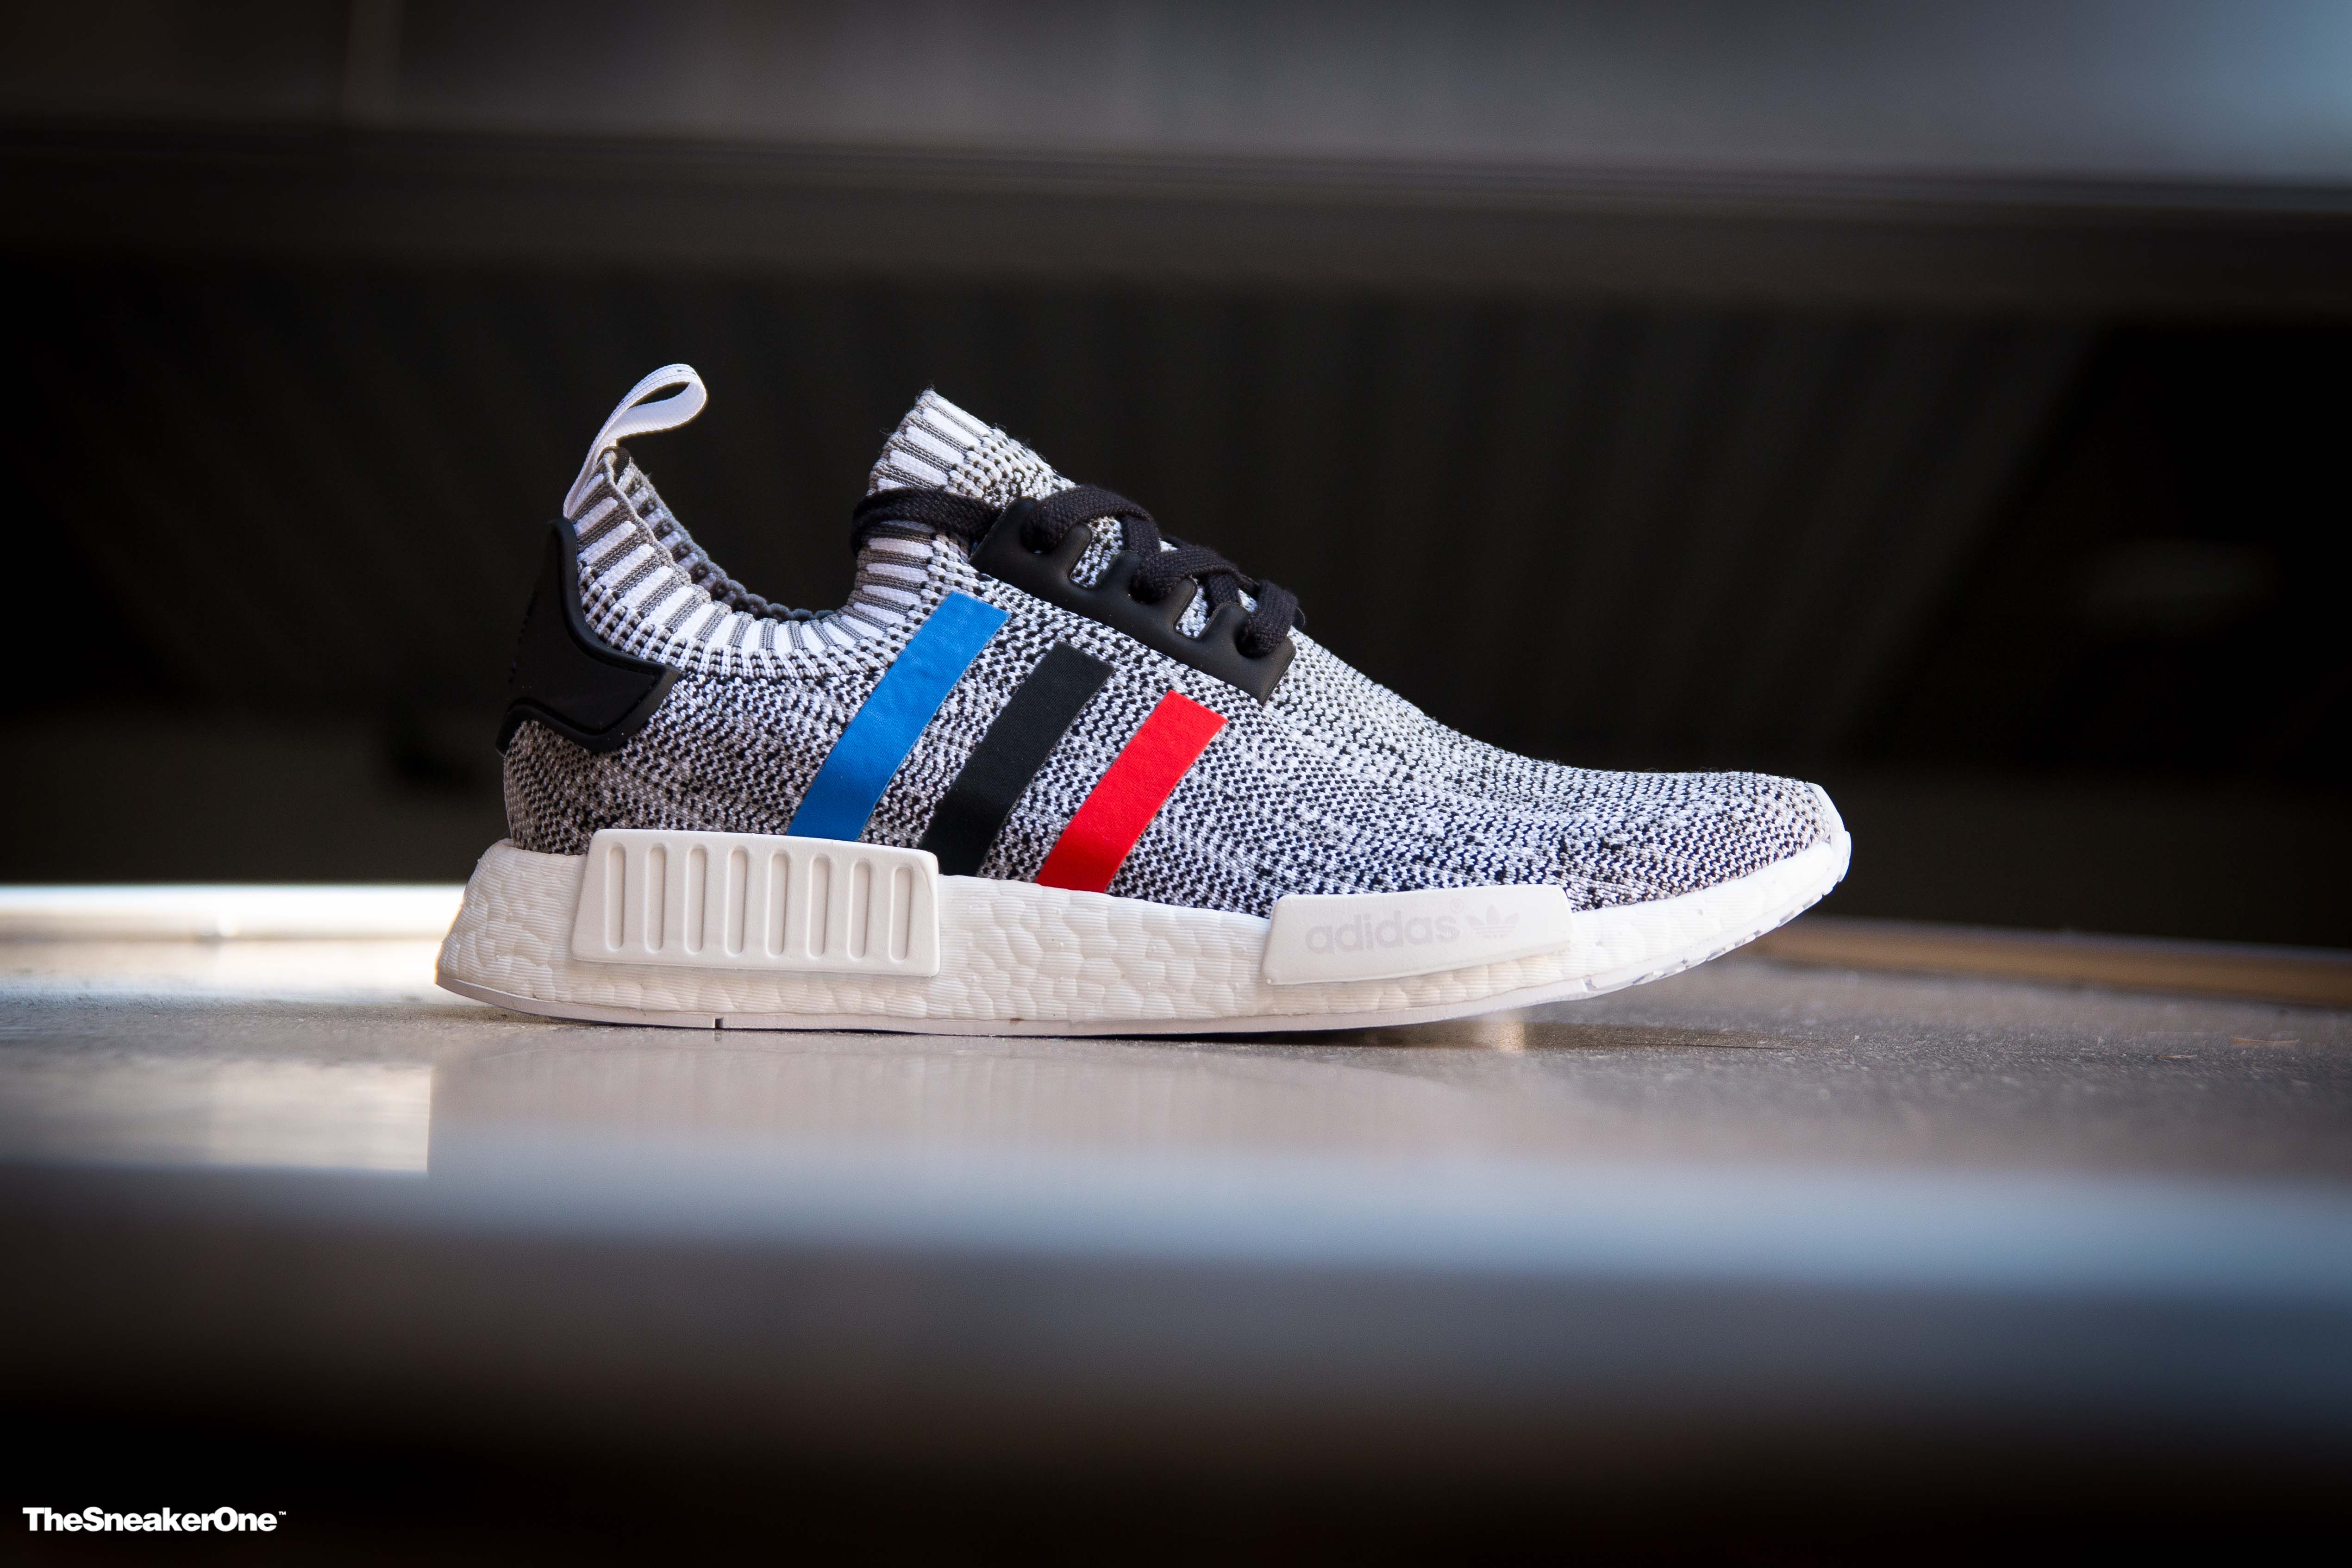 Adidas NMD "Tri-Color" Pack - The Sneaker One Blog